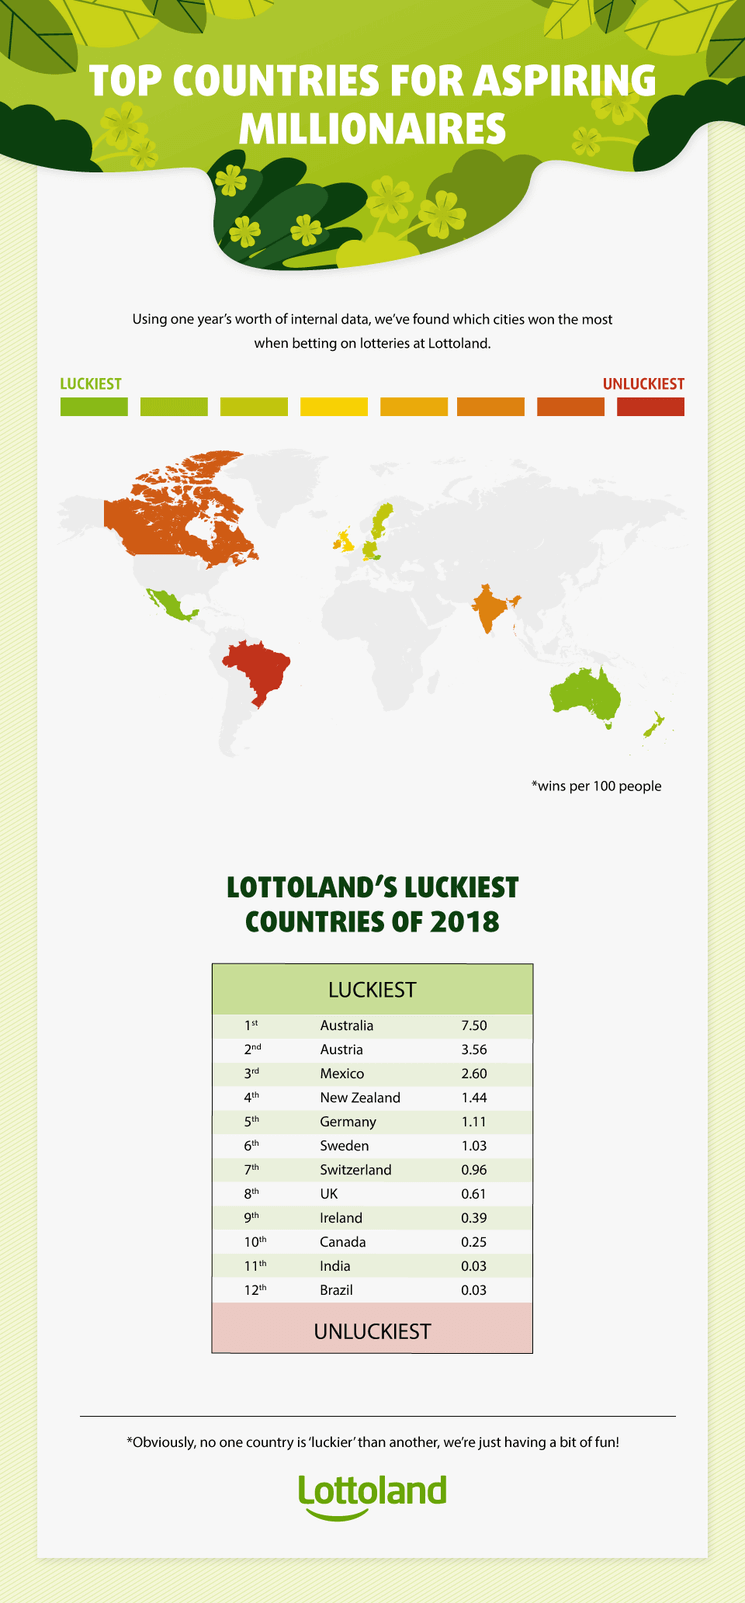 Lottoland’s Luckiest Countries in 2018